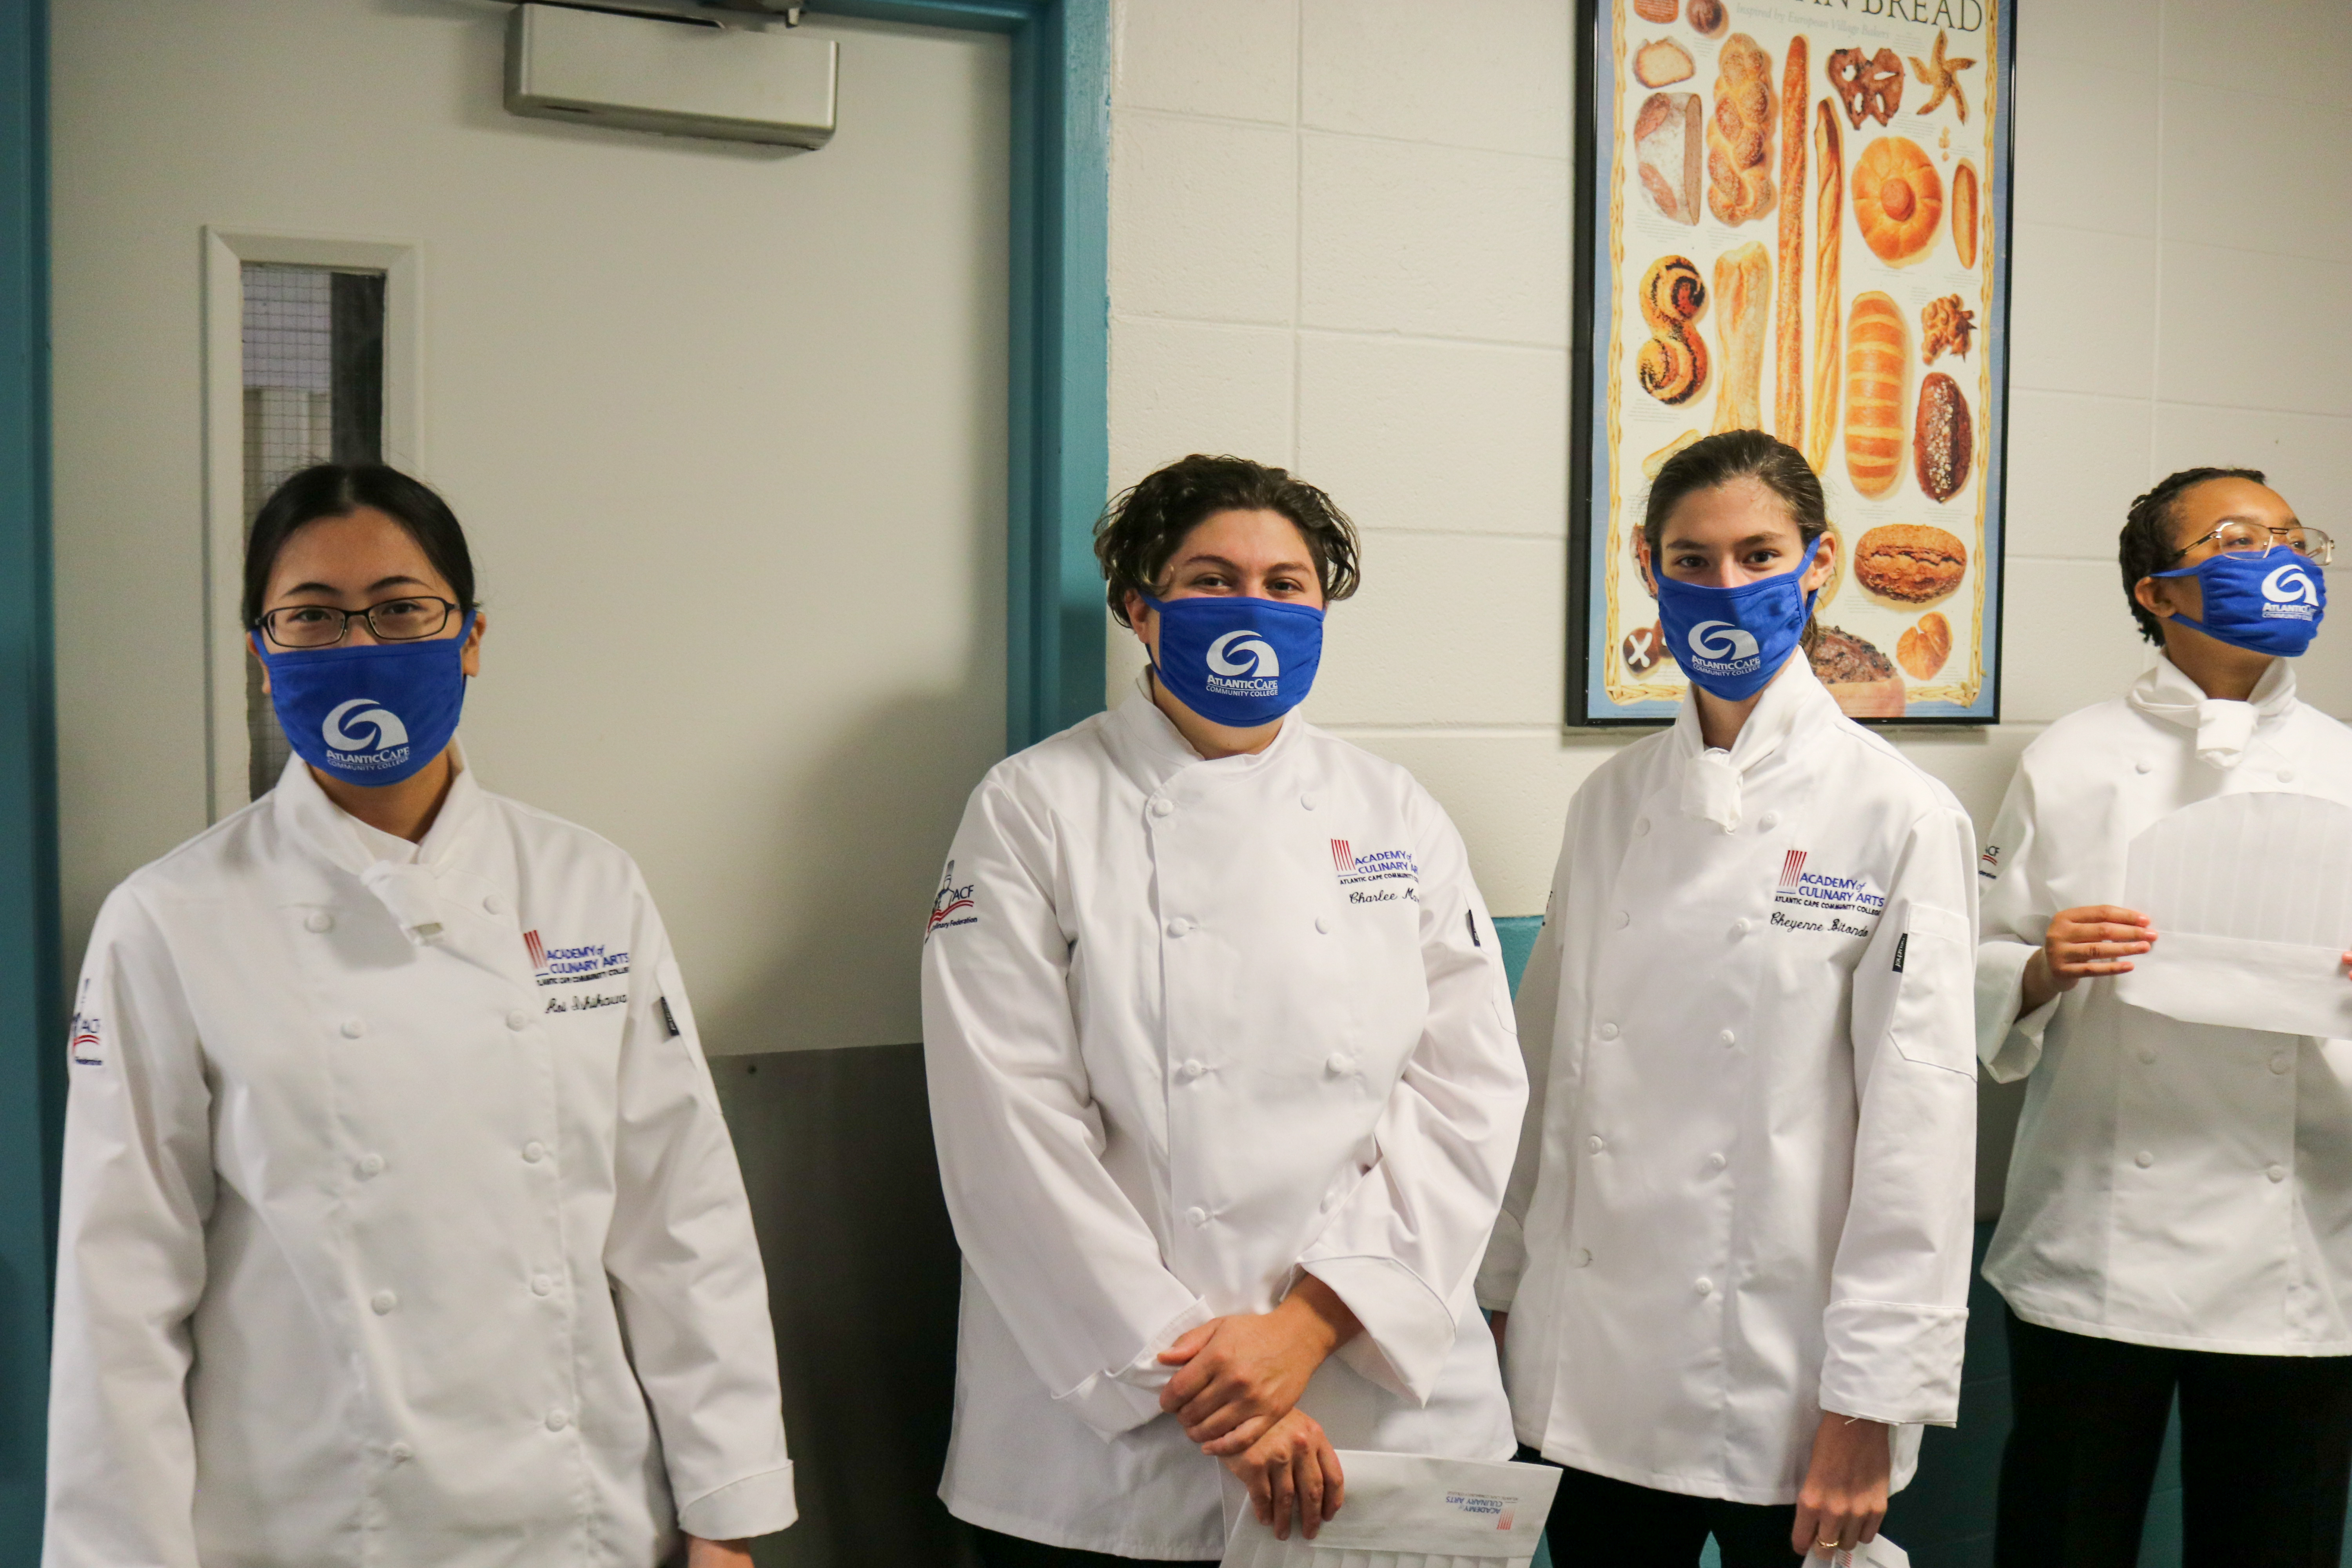 Academy of Culinary Arts students lined up in the hallway